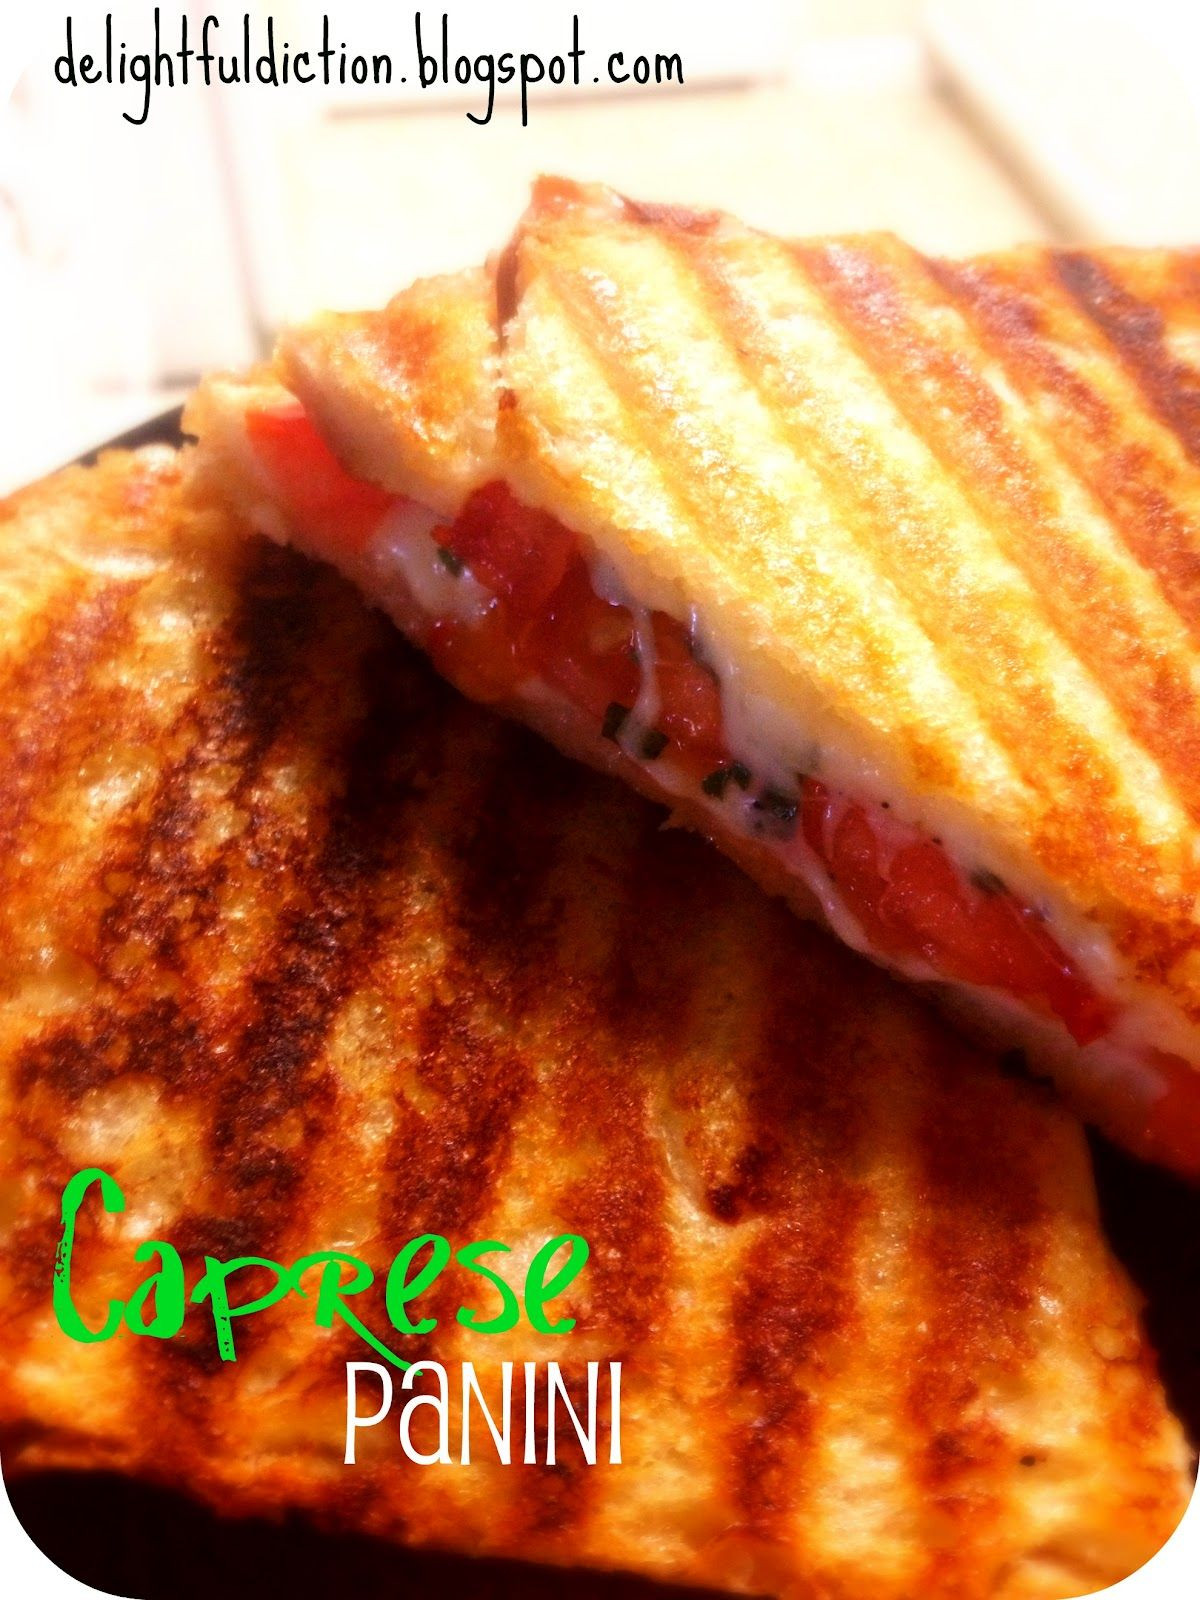 George Foreman Grill Recipes Panini
 Easy Caprese Panini on a George Foreman grill cooking